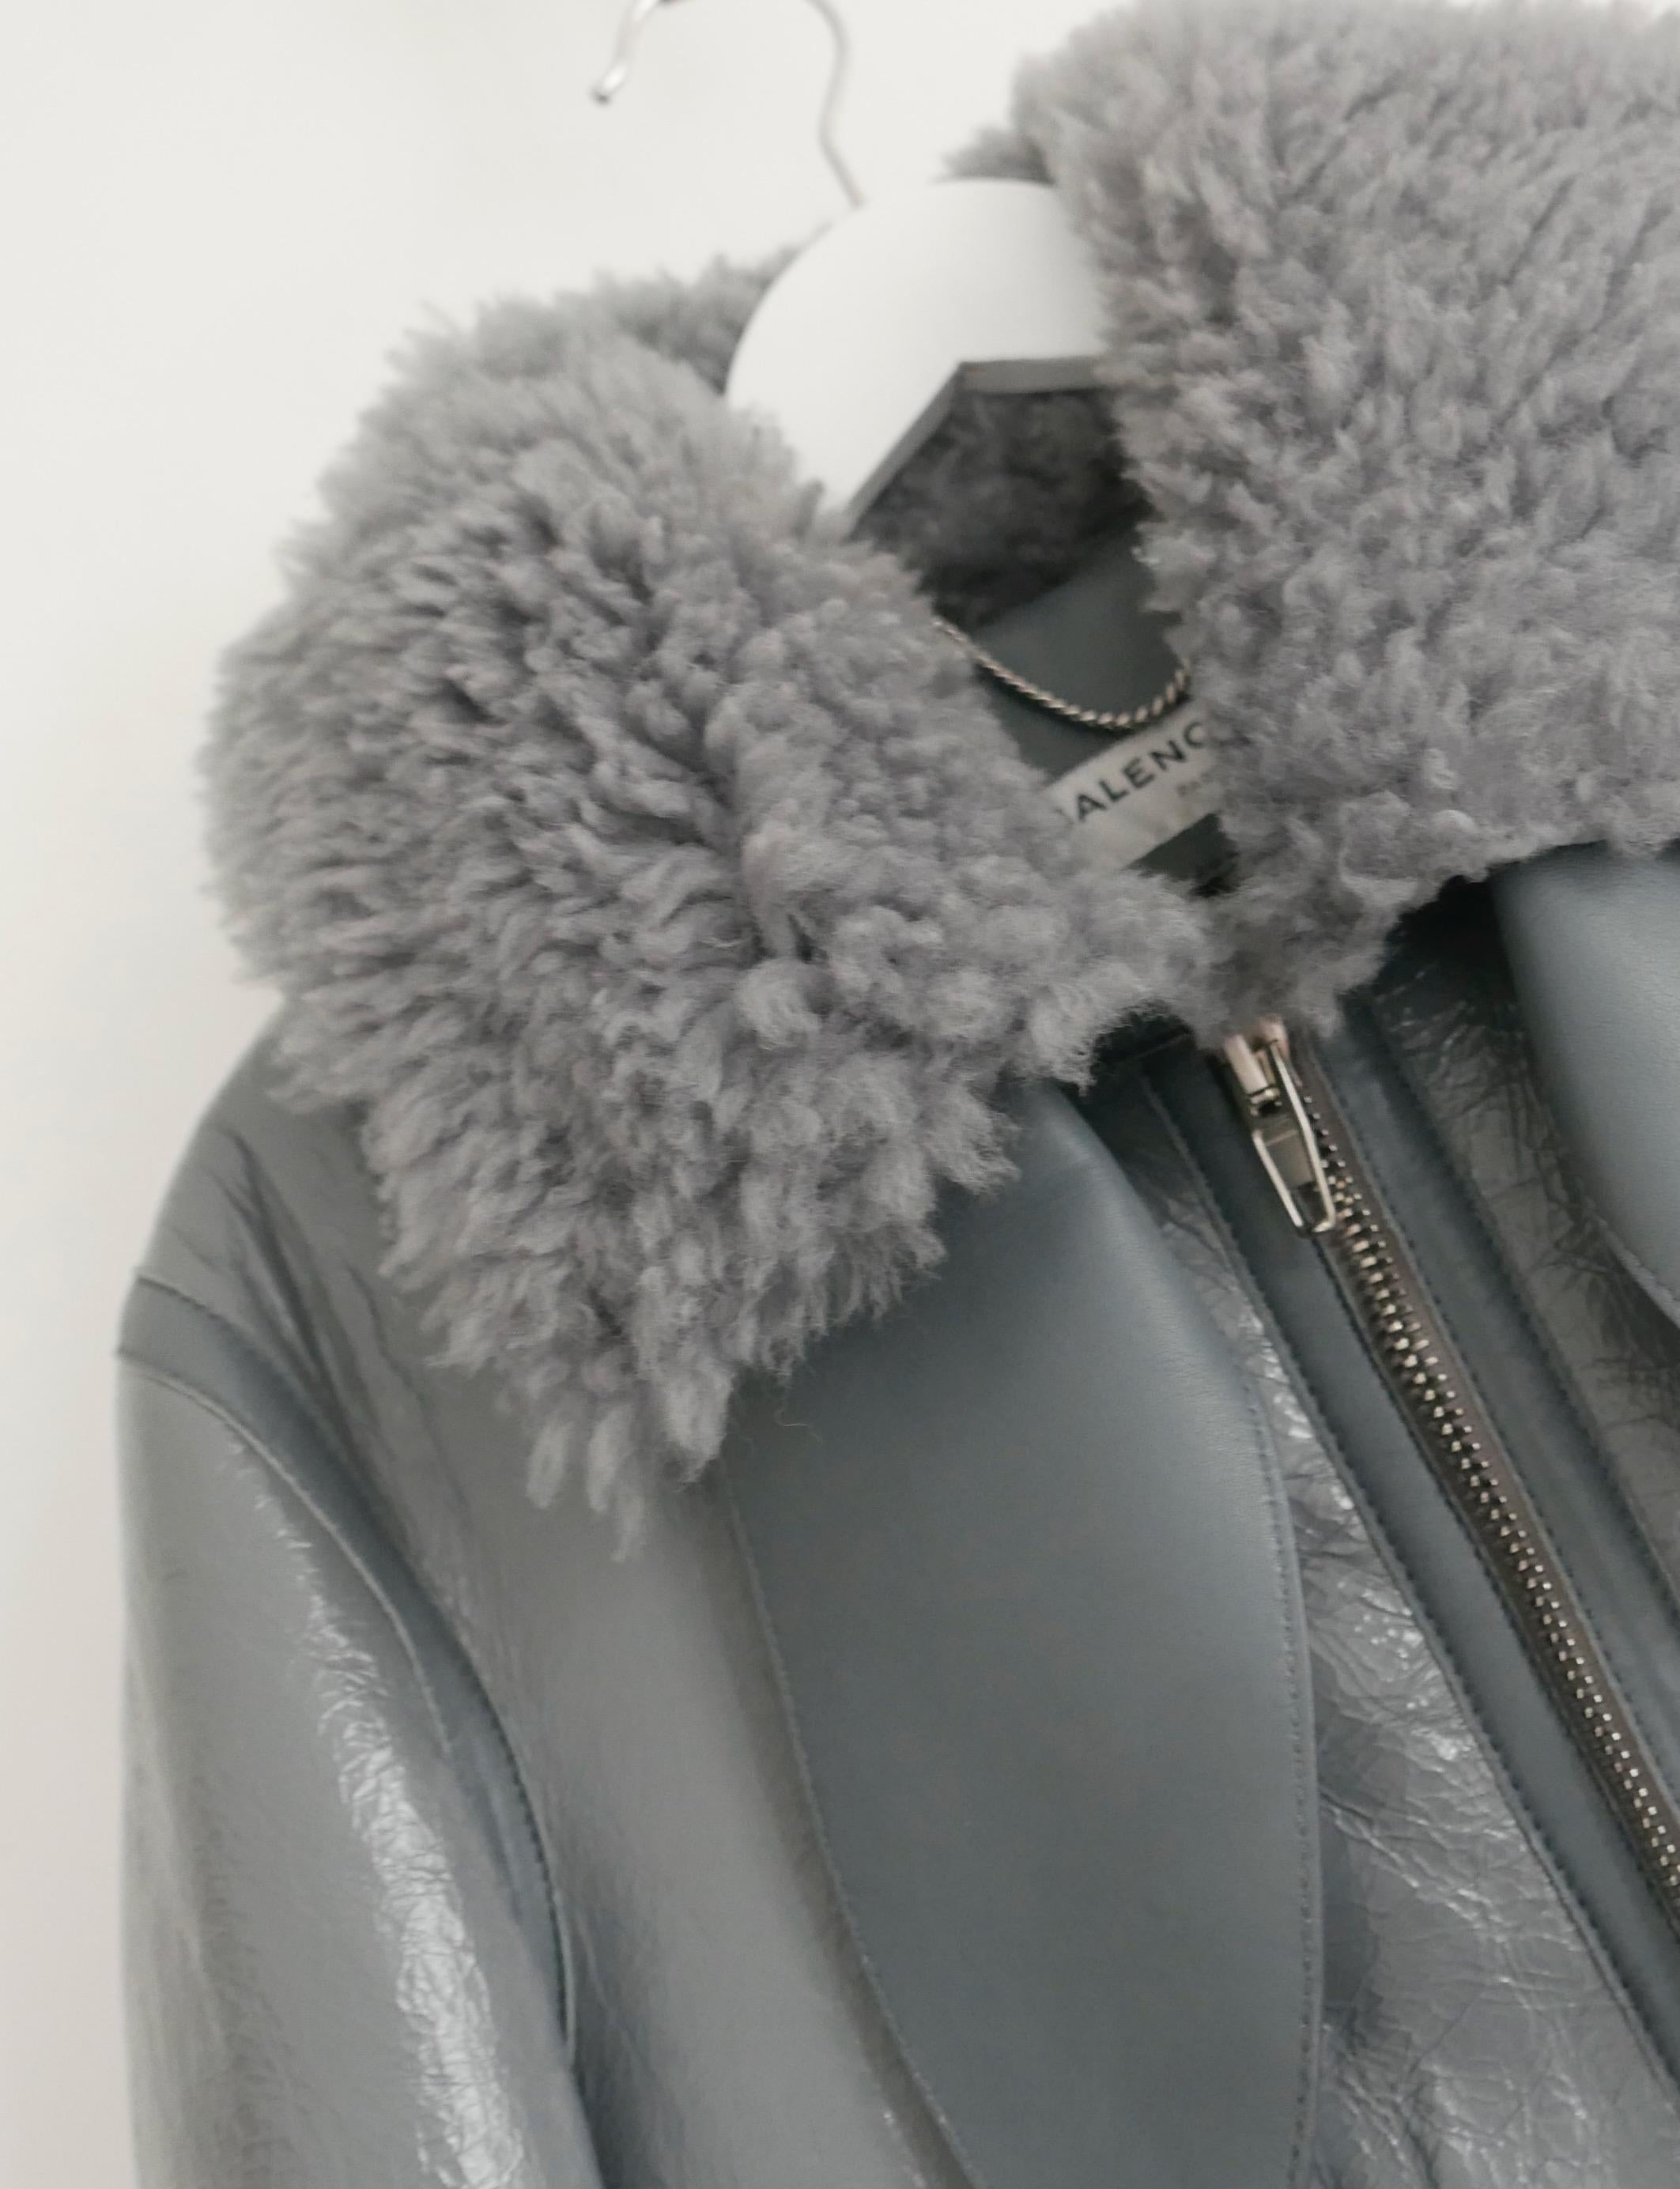 Balenciaga PF17 Grey Patent Leather Shearling Biker Jacket In New Condition For Sale In London, GB